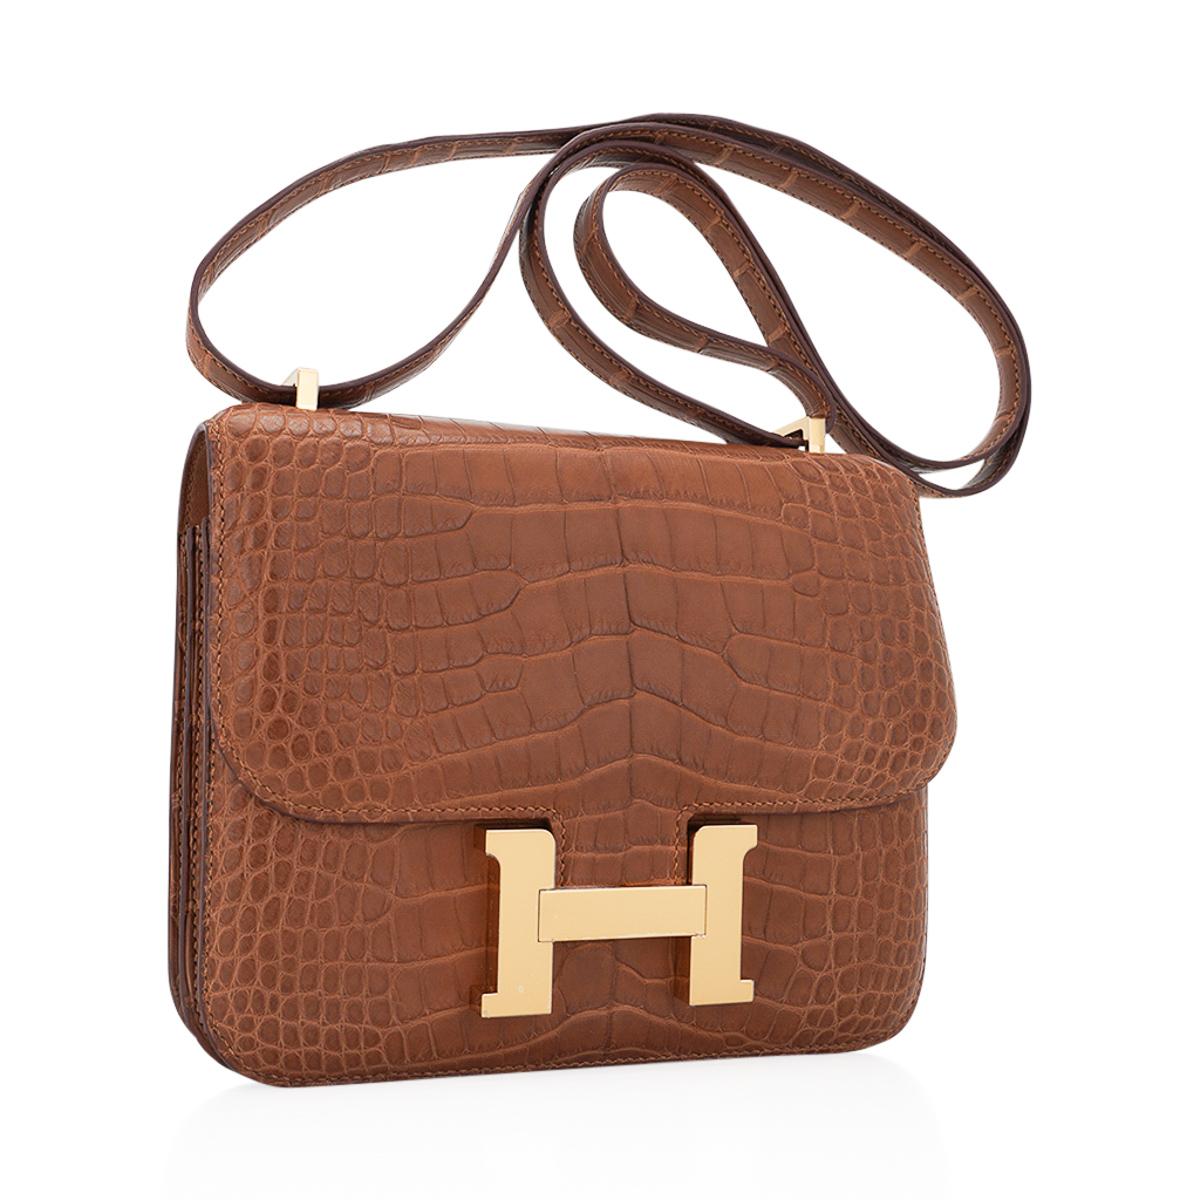 Mightychic offers an Hermes 1-18 Constance bag featured in Gold Matte Alligator.
Removeable mirror with alligator tab. 
Rich with Gold hardware.
The effect is understated chic.
Hermes Paris Made in France is stamped on front under flap.
Comes with